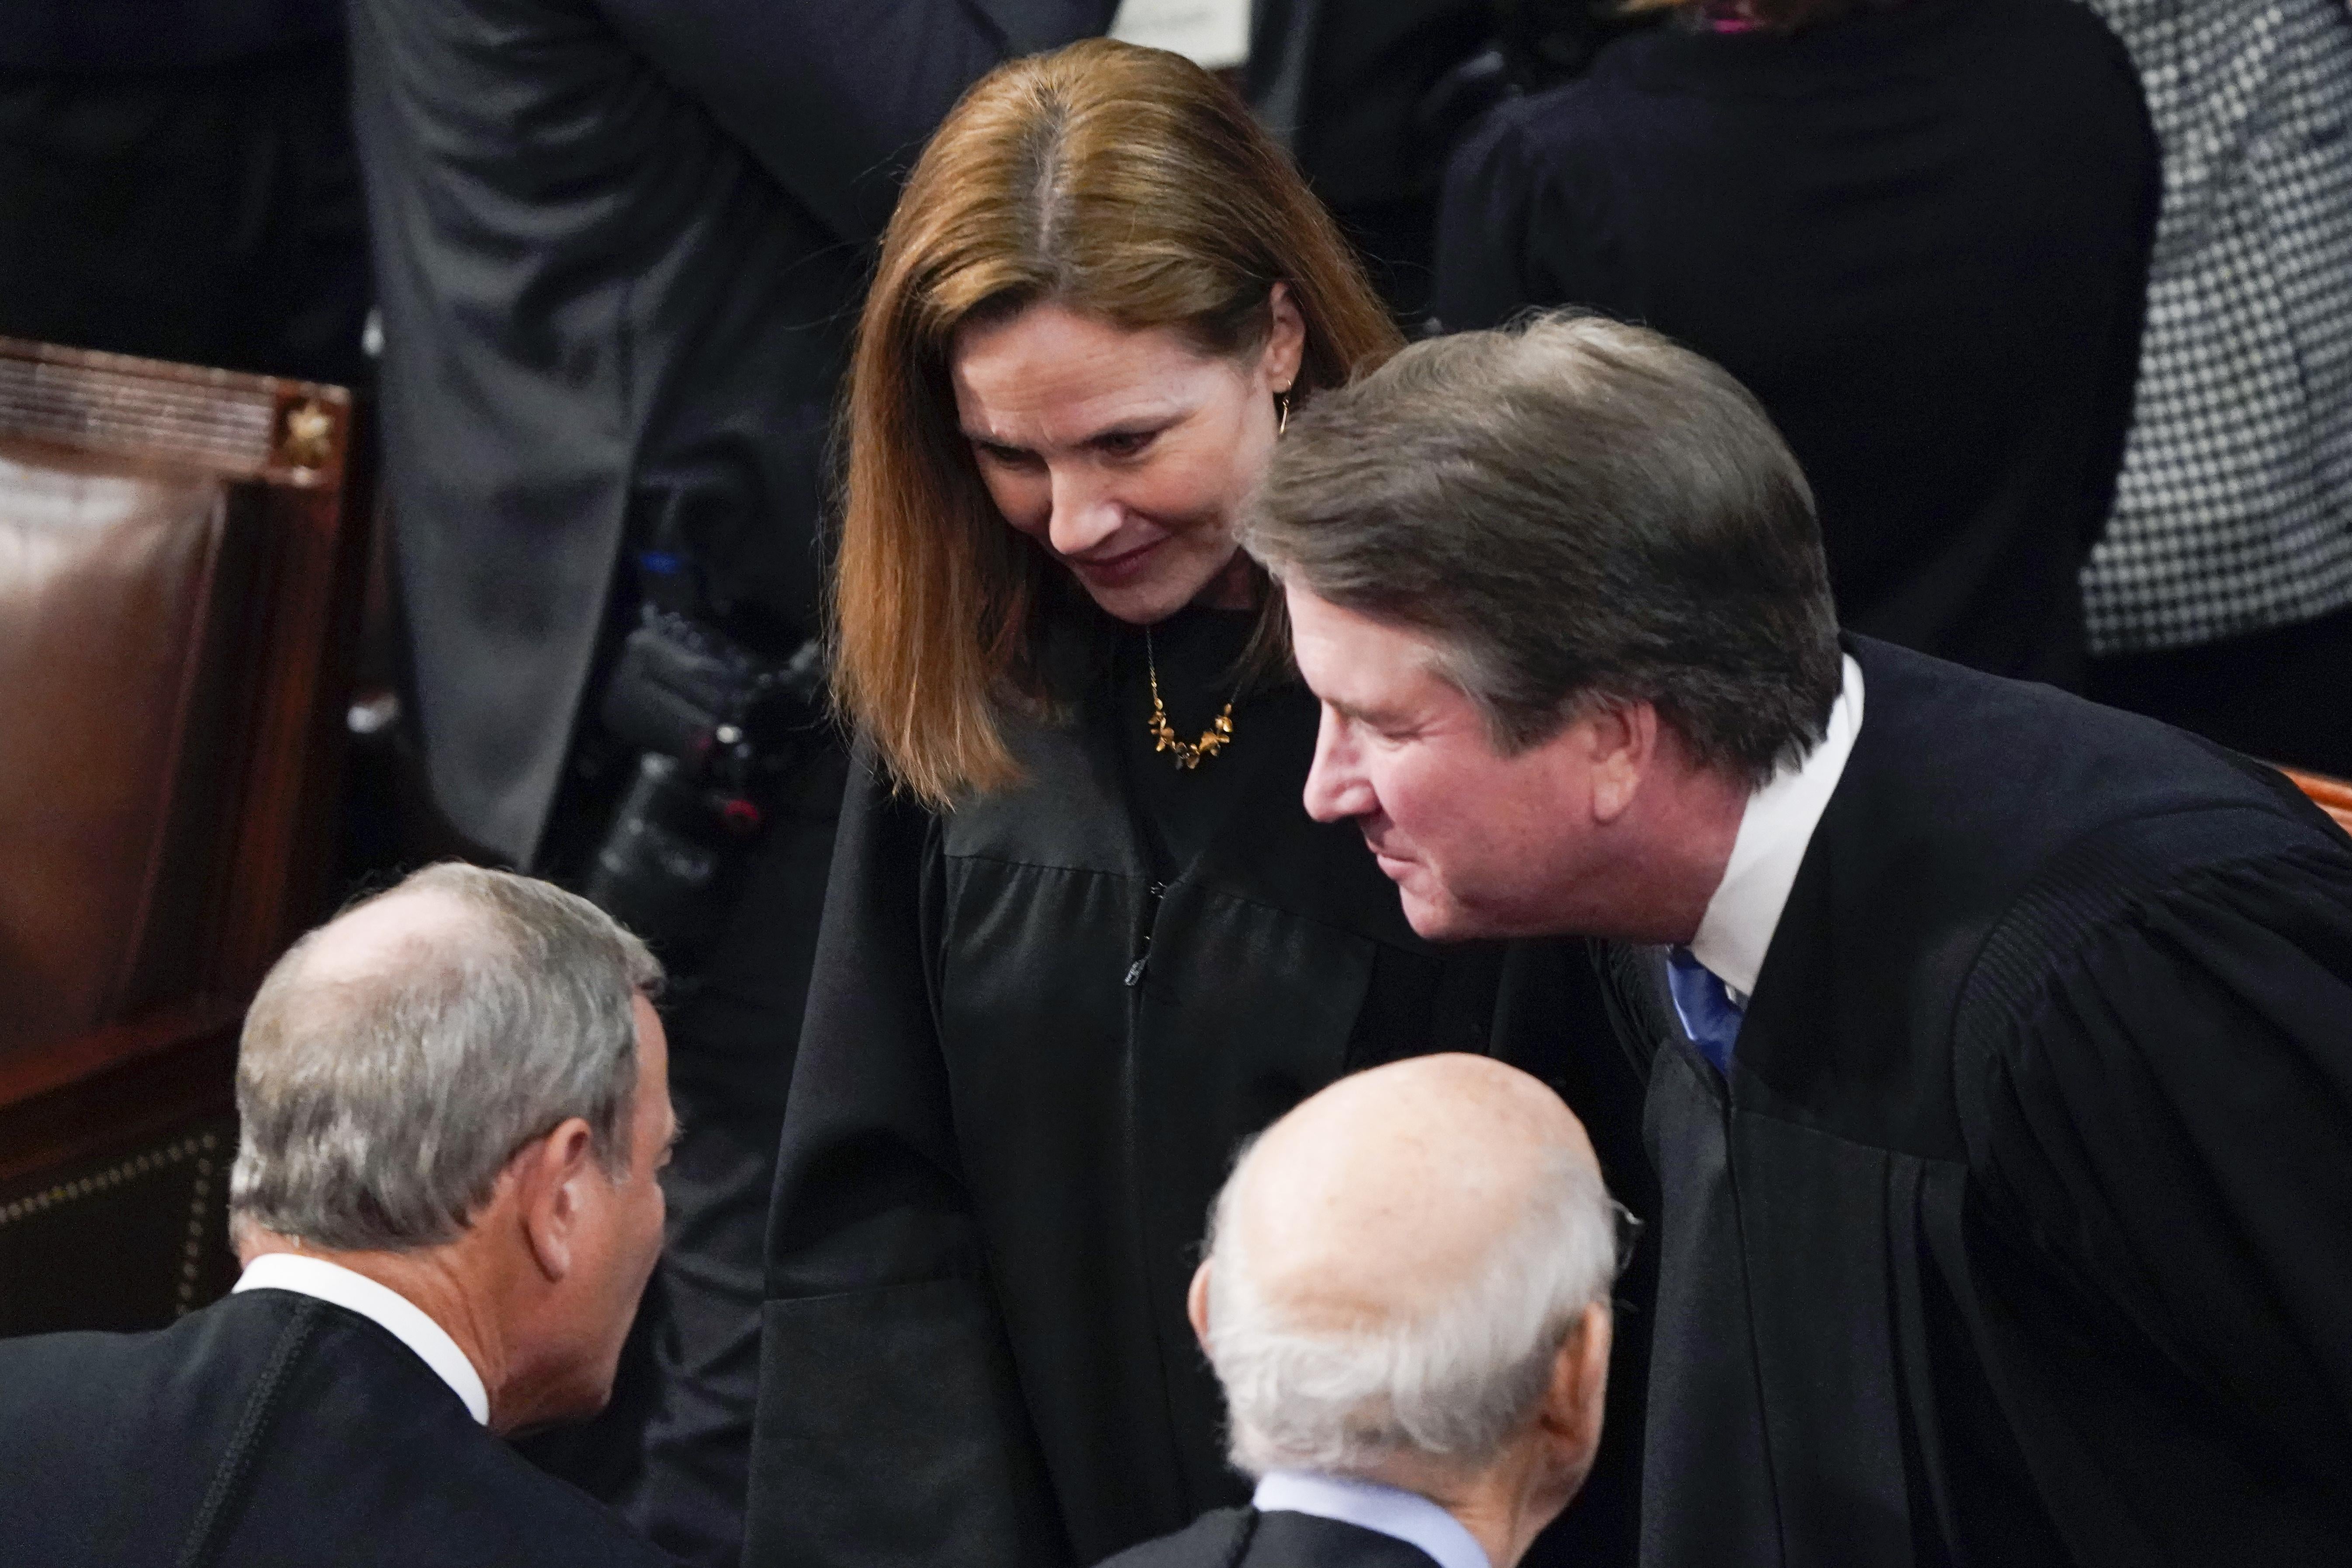 Barrett and Kavanaugh lean in toward Roberts and Breyer, all wearing their robes